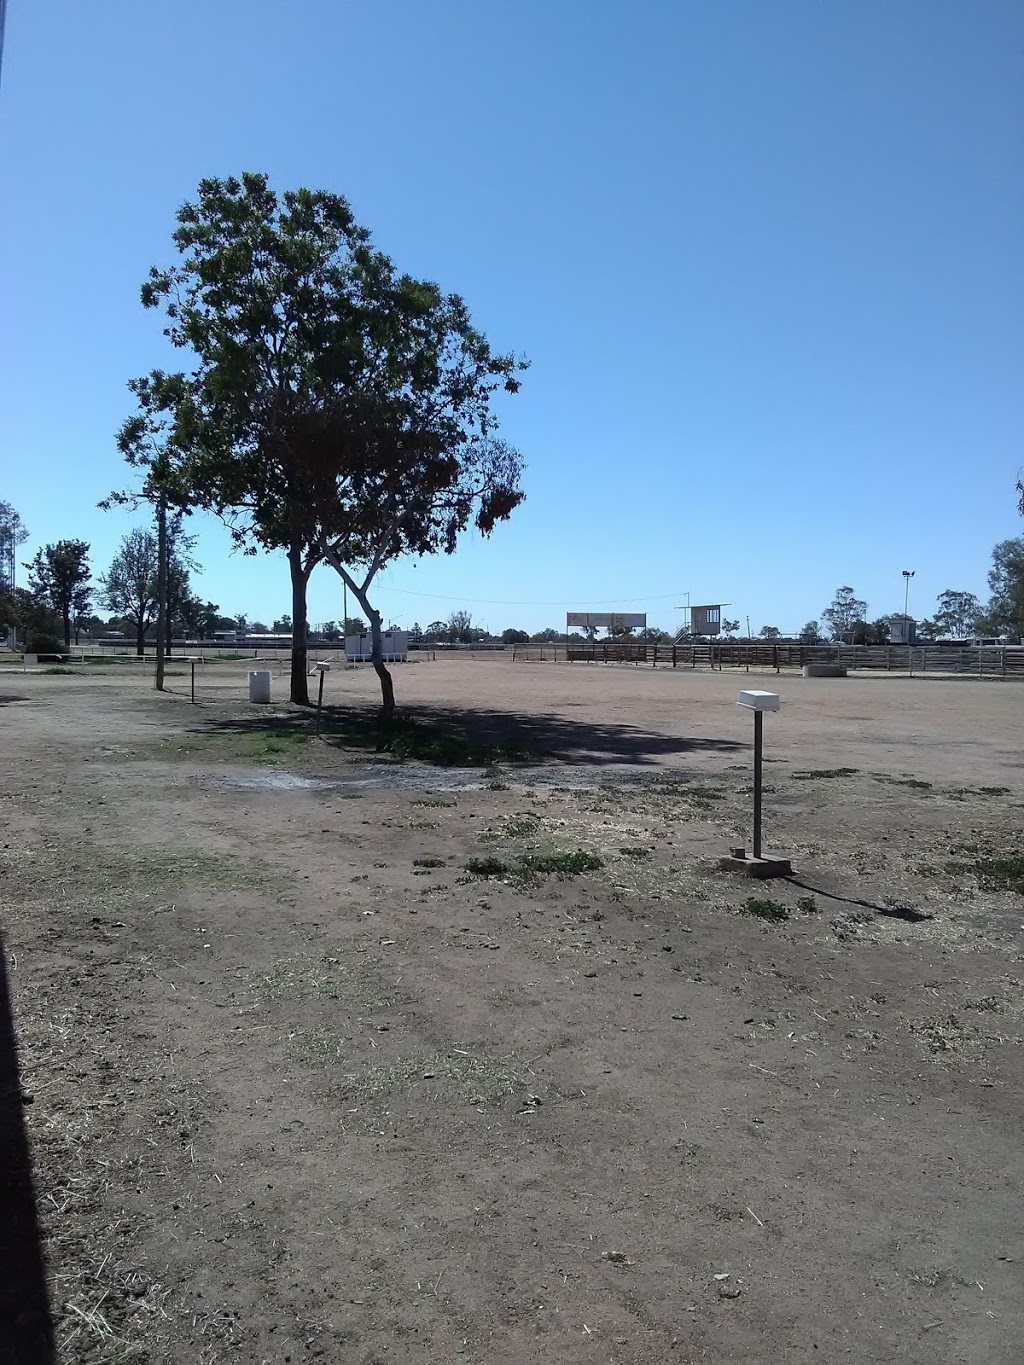 Coonamble Showground | campground | 9565 Castlereagh Hwy, Coonamble NSW 2829, Australia